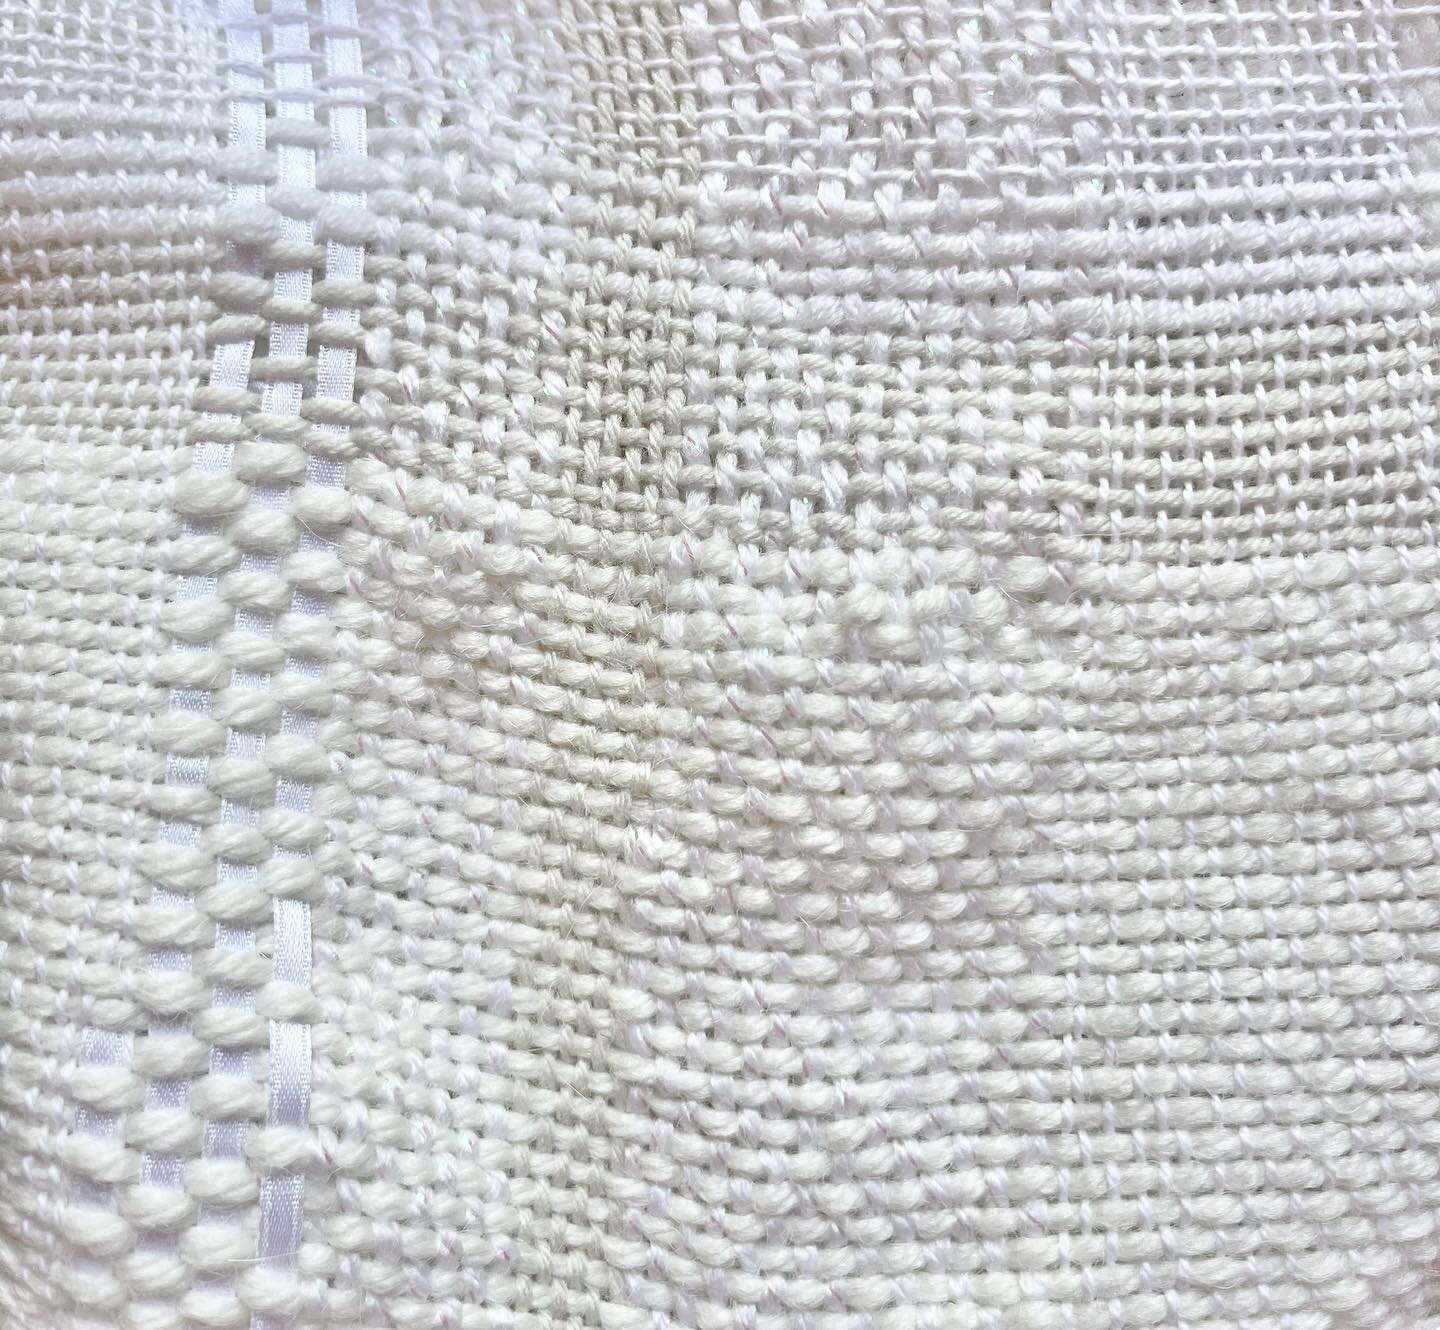 Hand woven whites and creams, employing traditional modes of making 

Wool sponsored by AWET